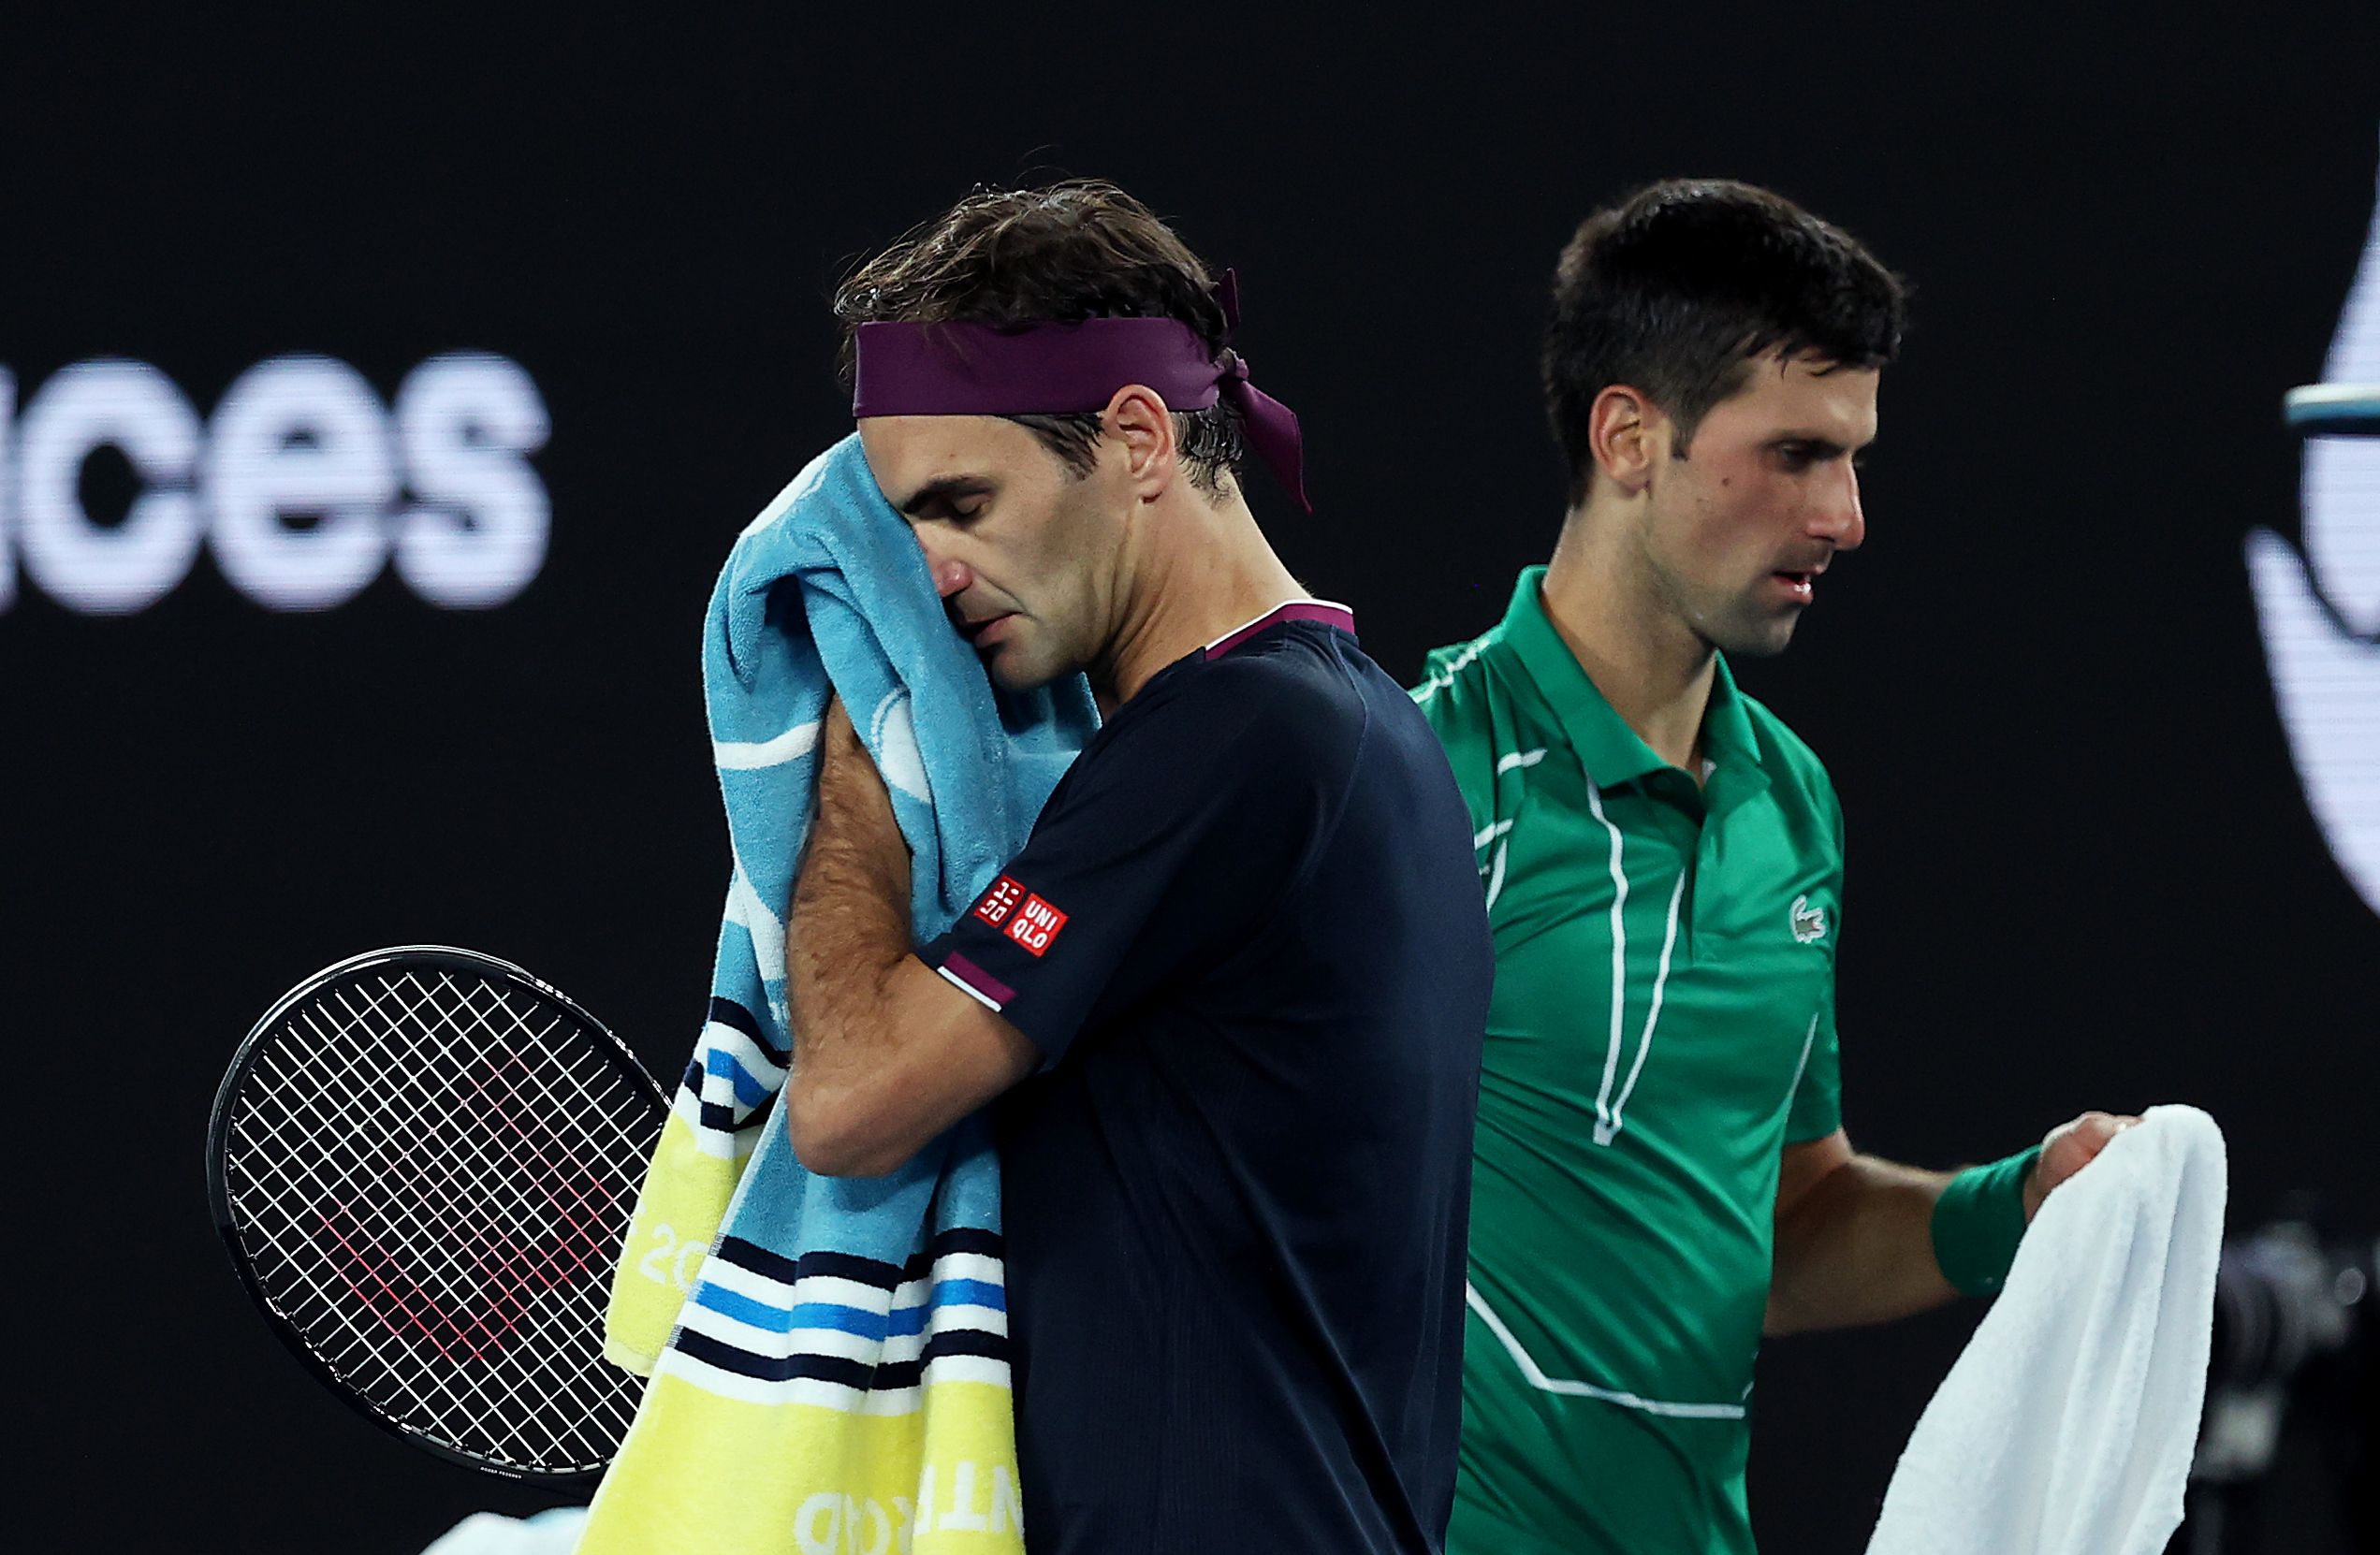 'Didn't sit with him well': Djokovic reveals uncomfortable truth about Federer relationship 